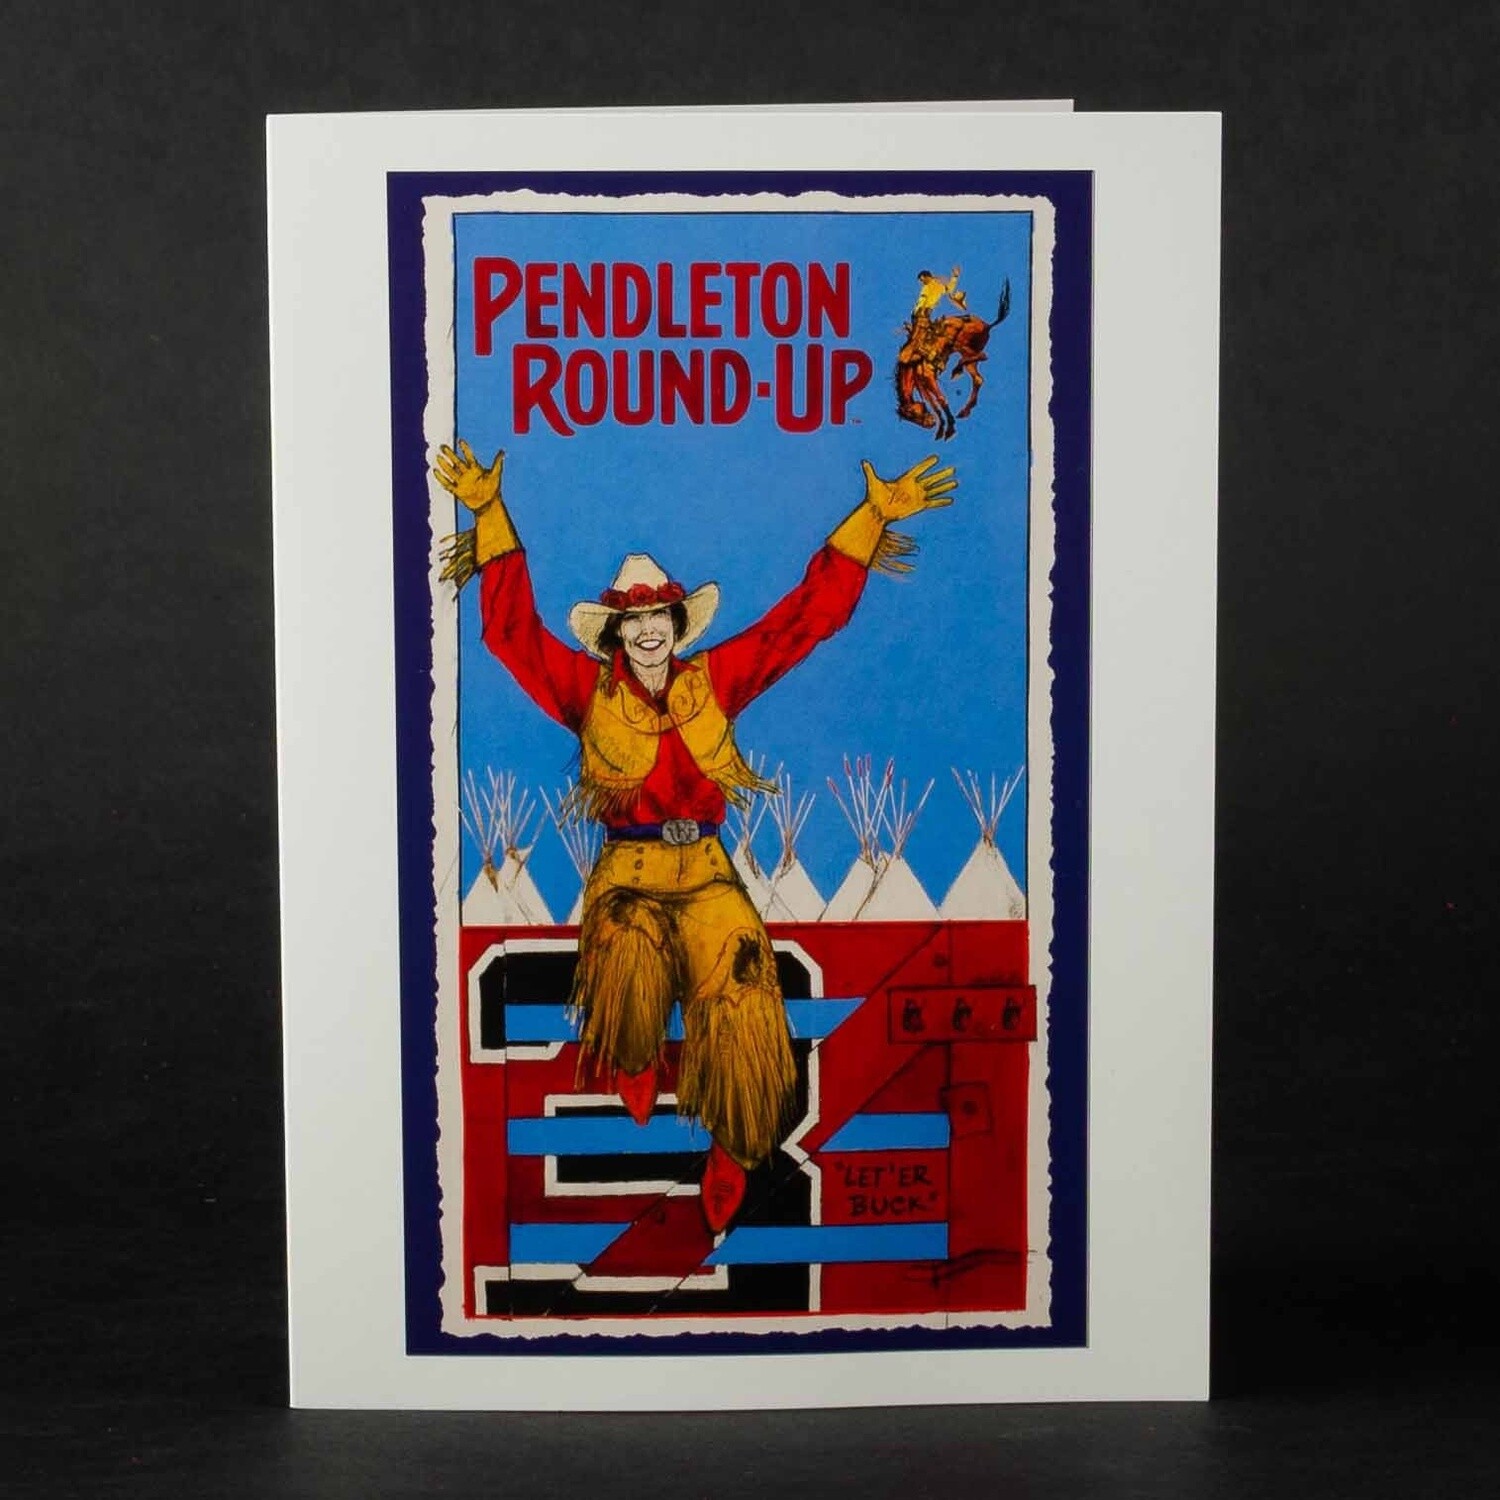 Single Pendleton Round-Up Donna Howell-Sickles Greeting Card